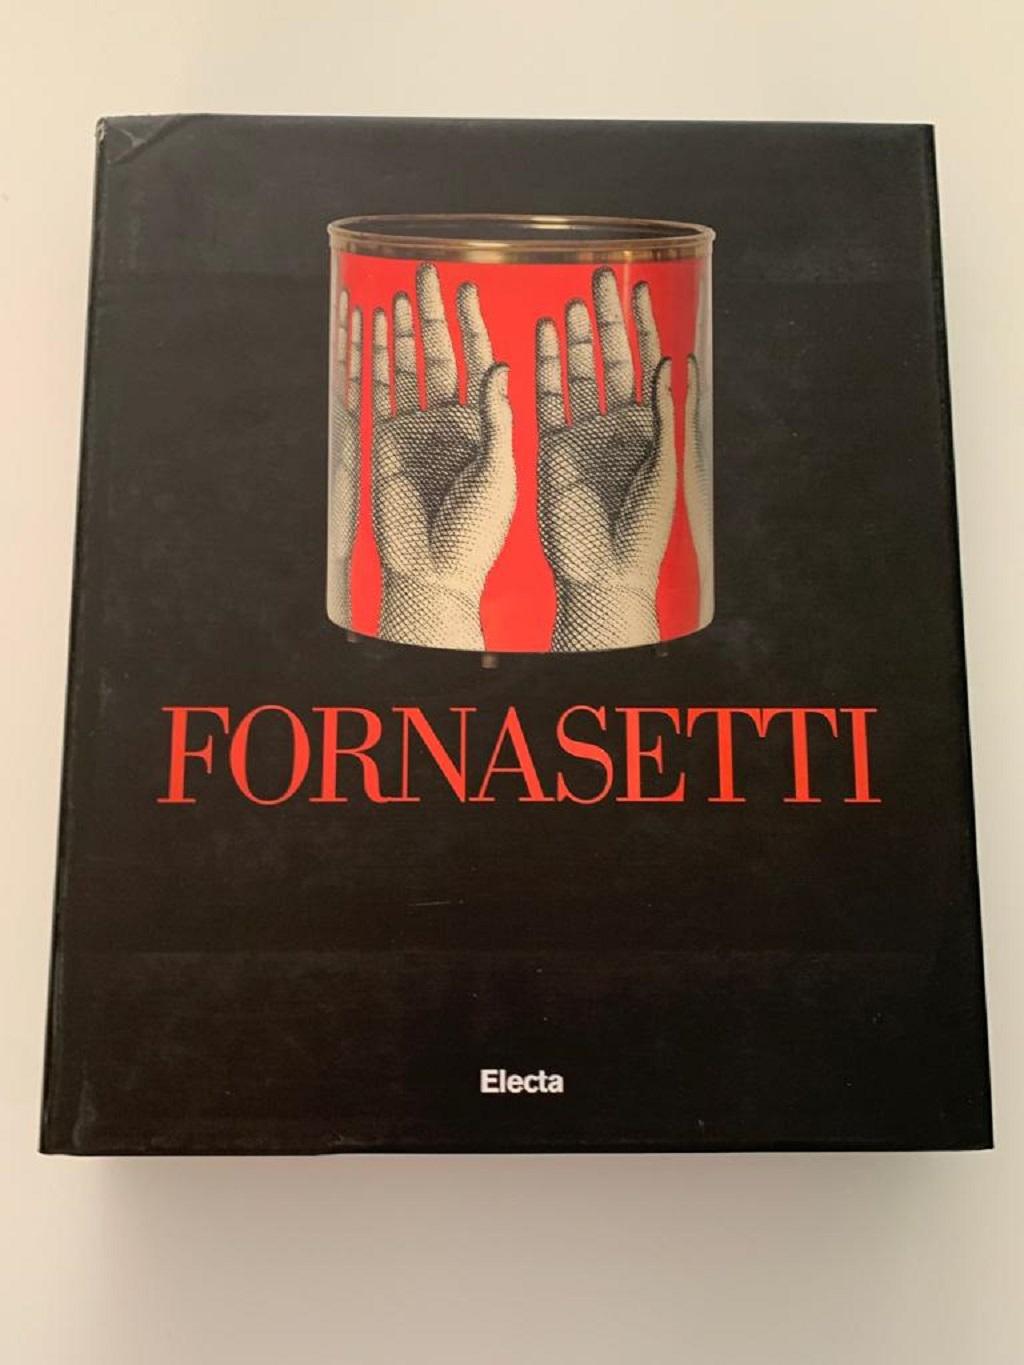 Cult designer for collectors of modern art, Piero Fornasetti was a brilliant and prolific creator: his artistic production, decoration, interior design and design is finally collected and documented in a complete volume.
Hardcover with box cover, in